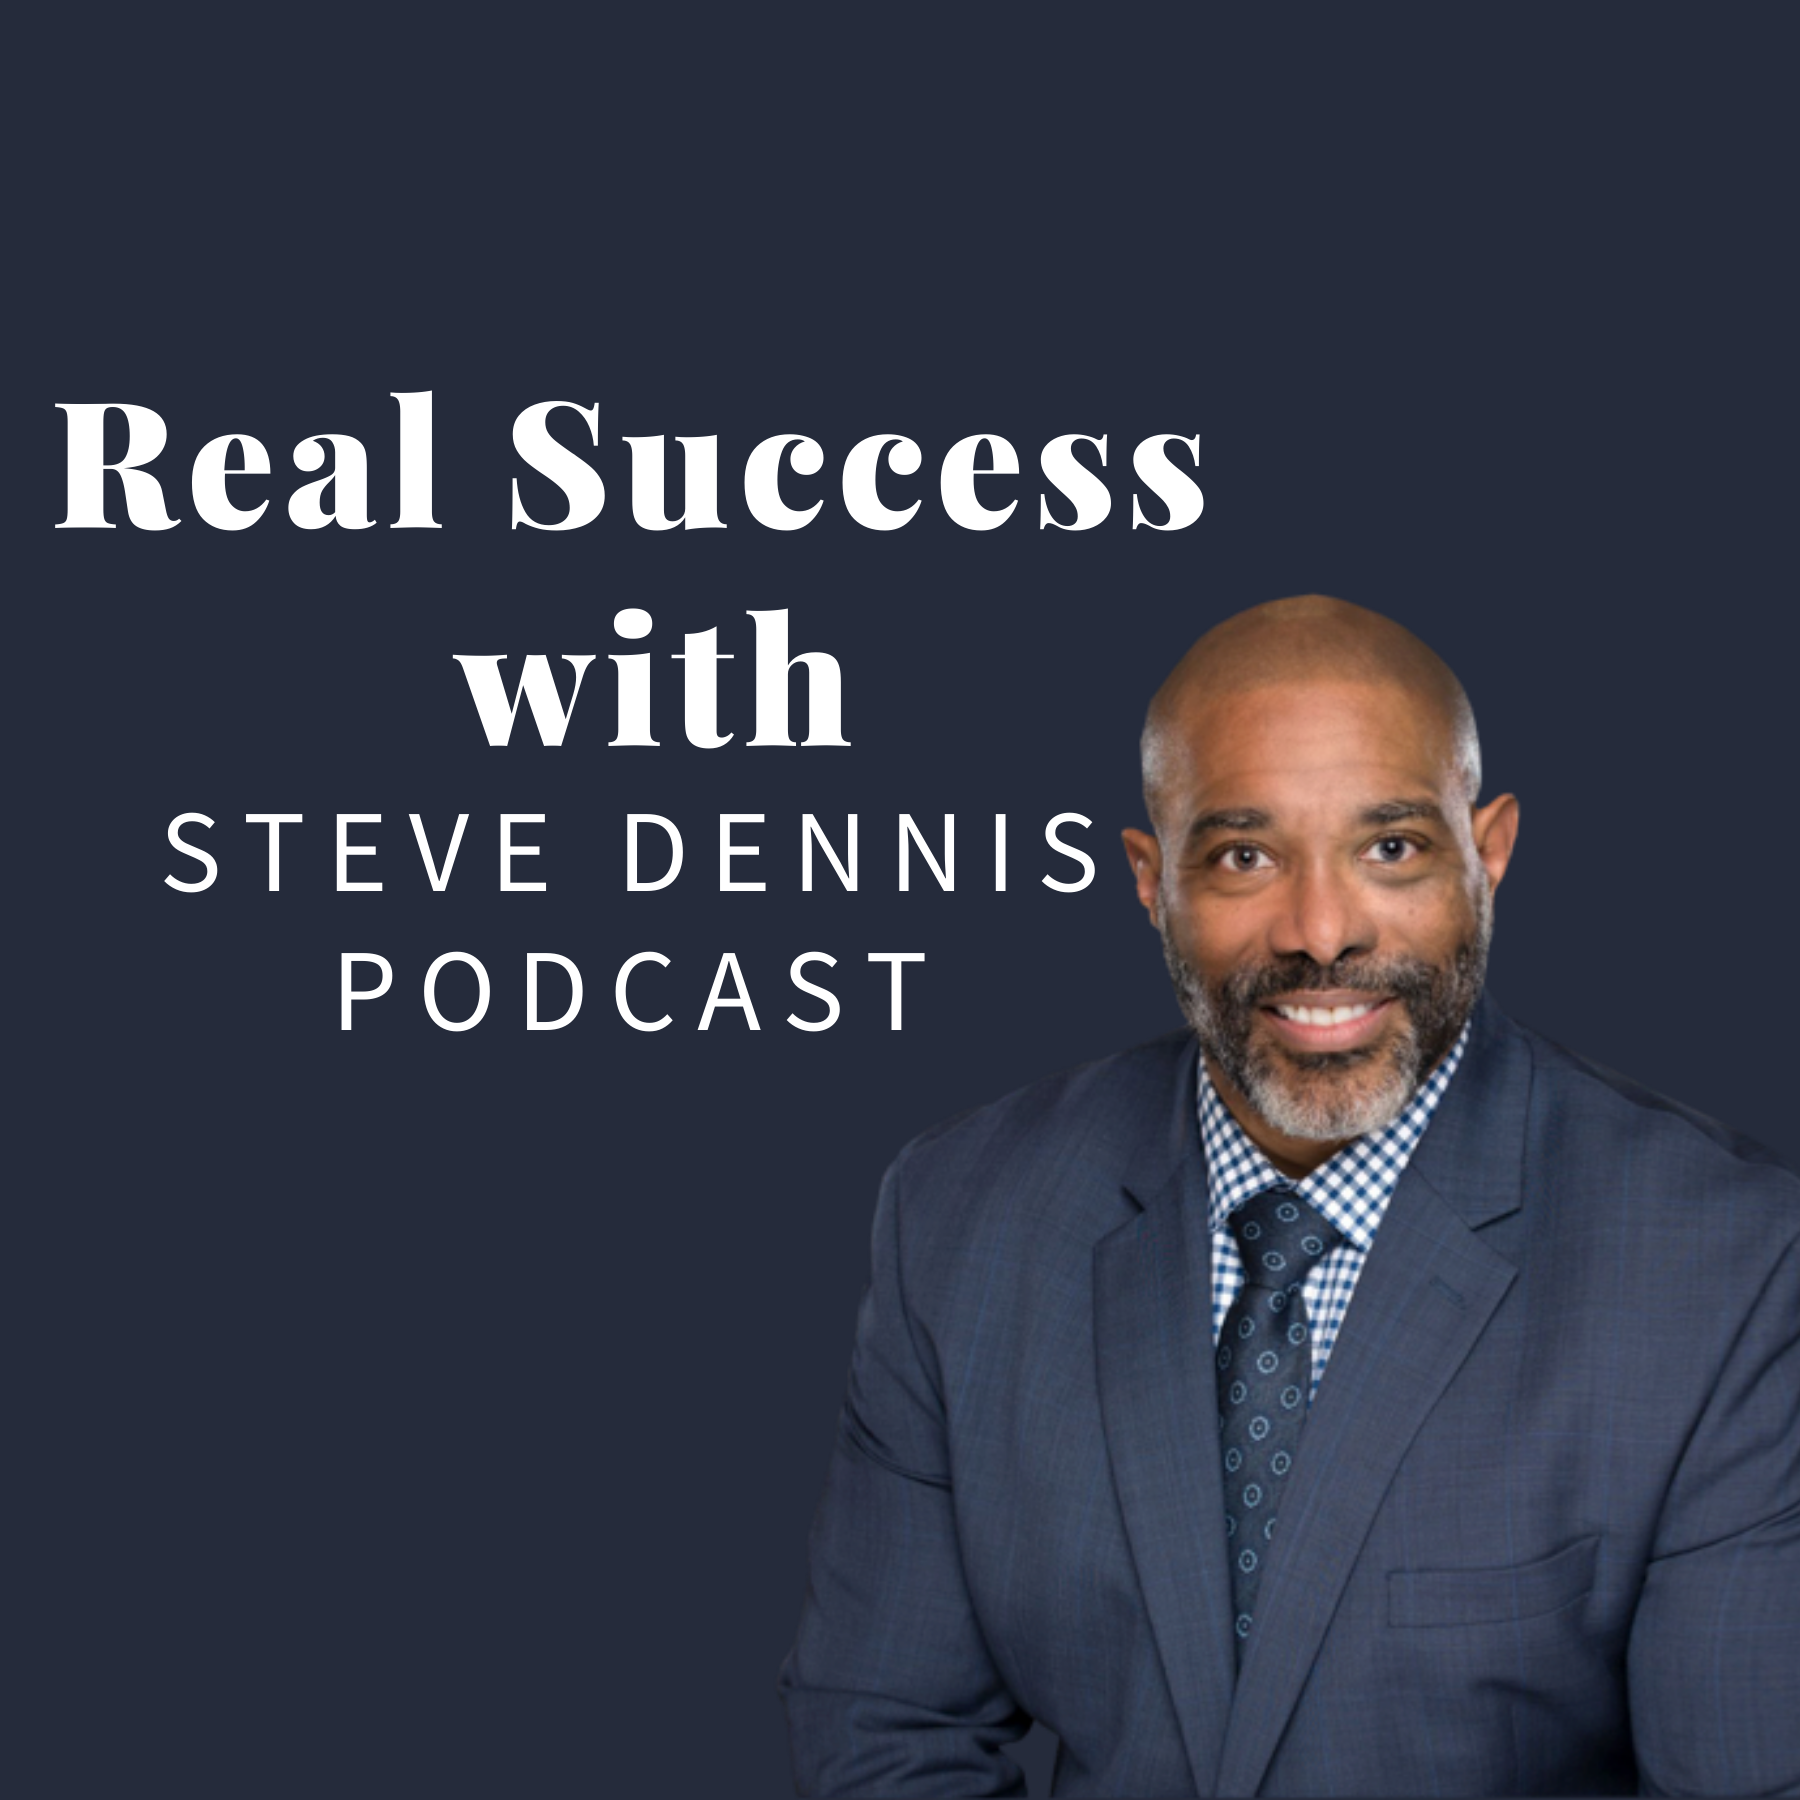 Real Success with Steve Dennis